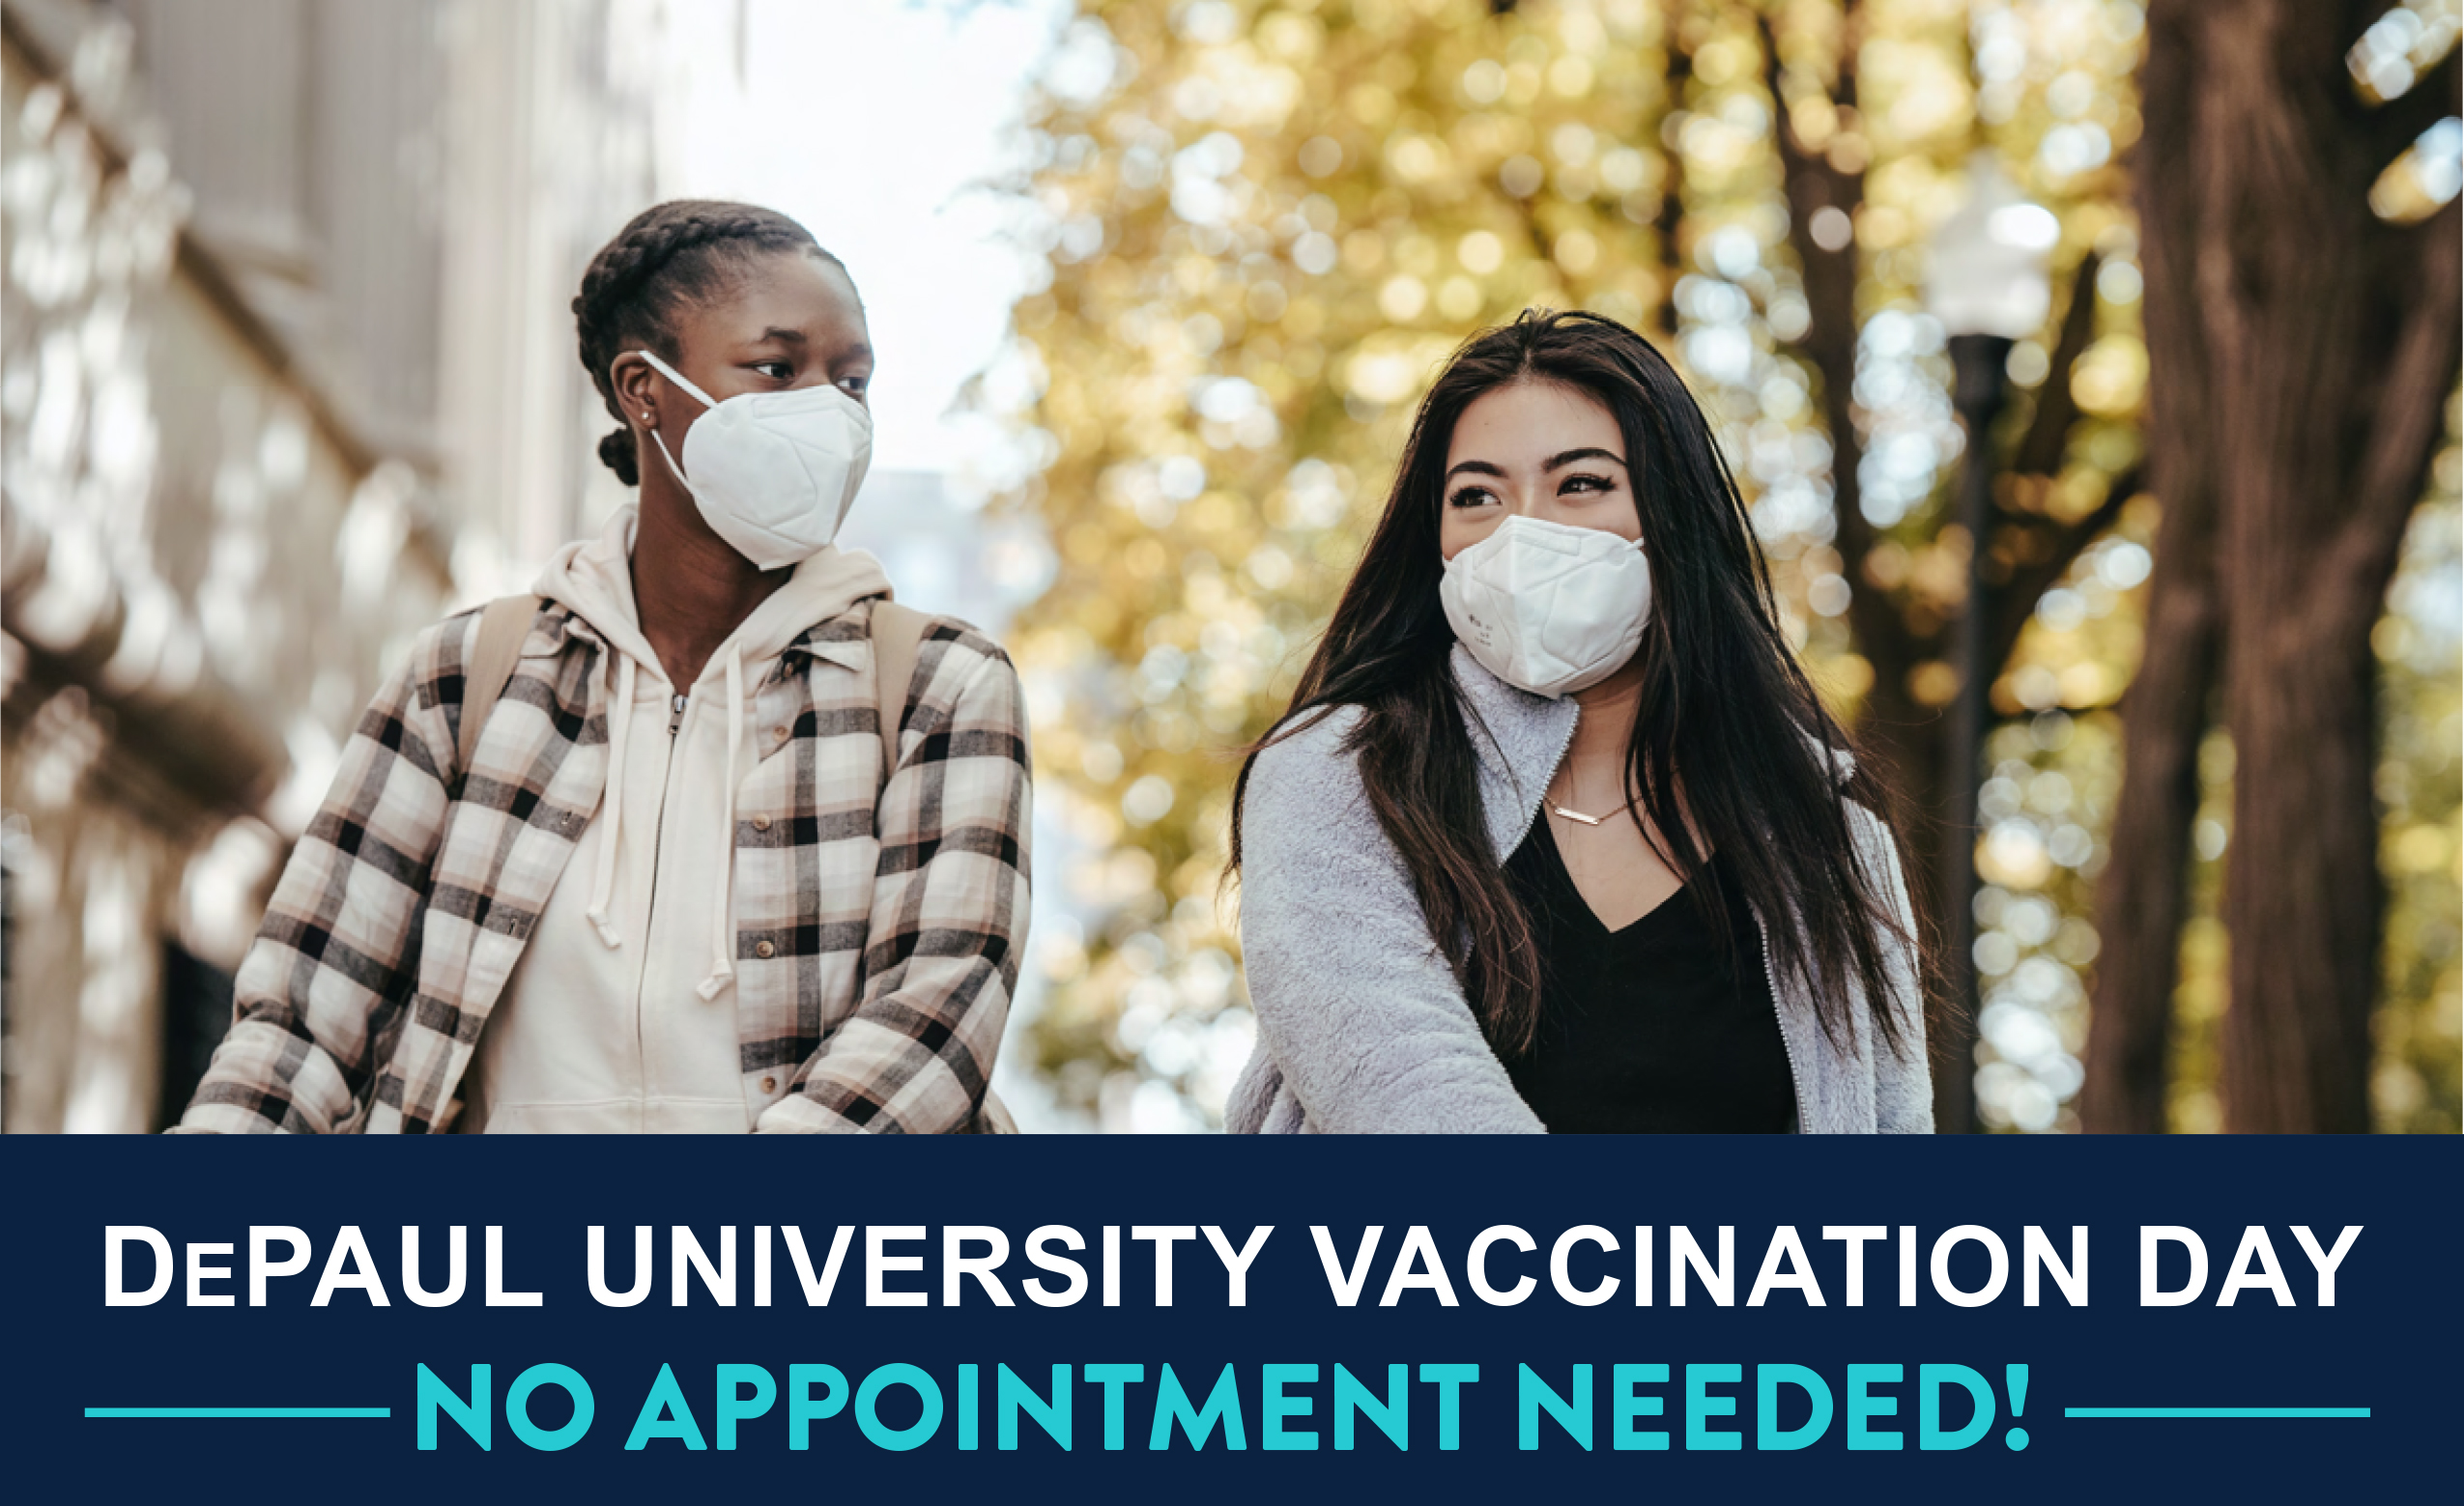 DePaul University Vaccination Day at Cook County